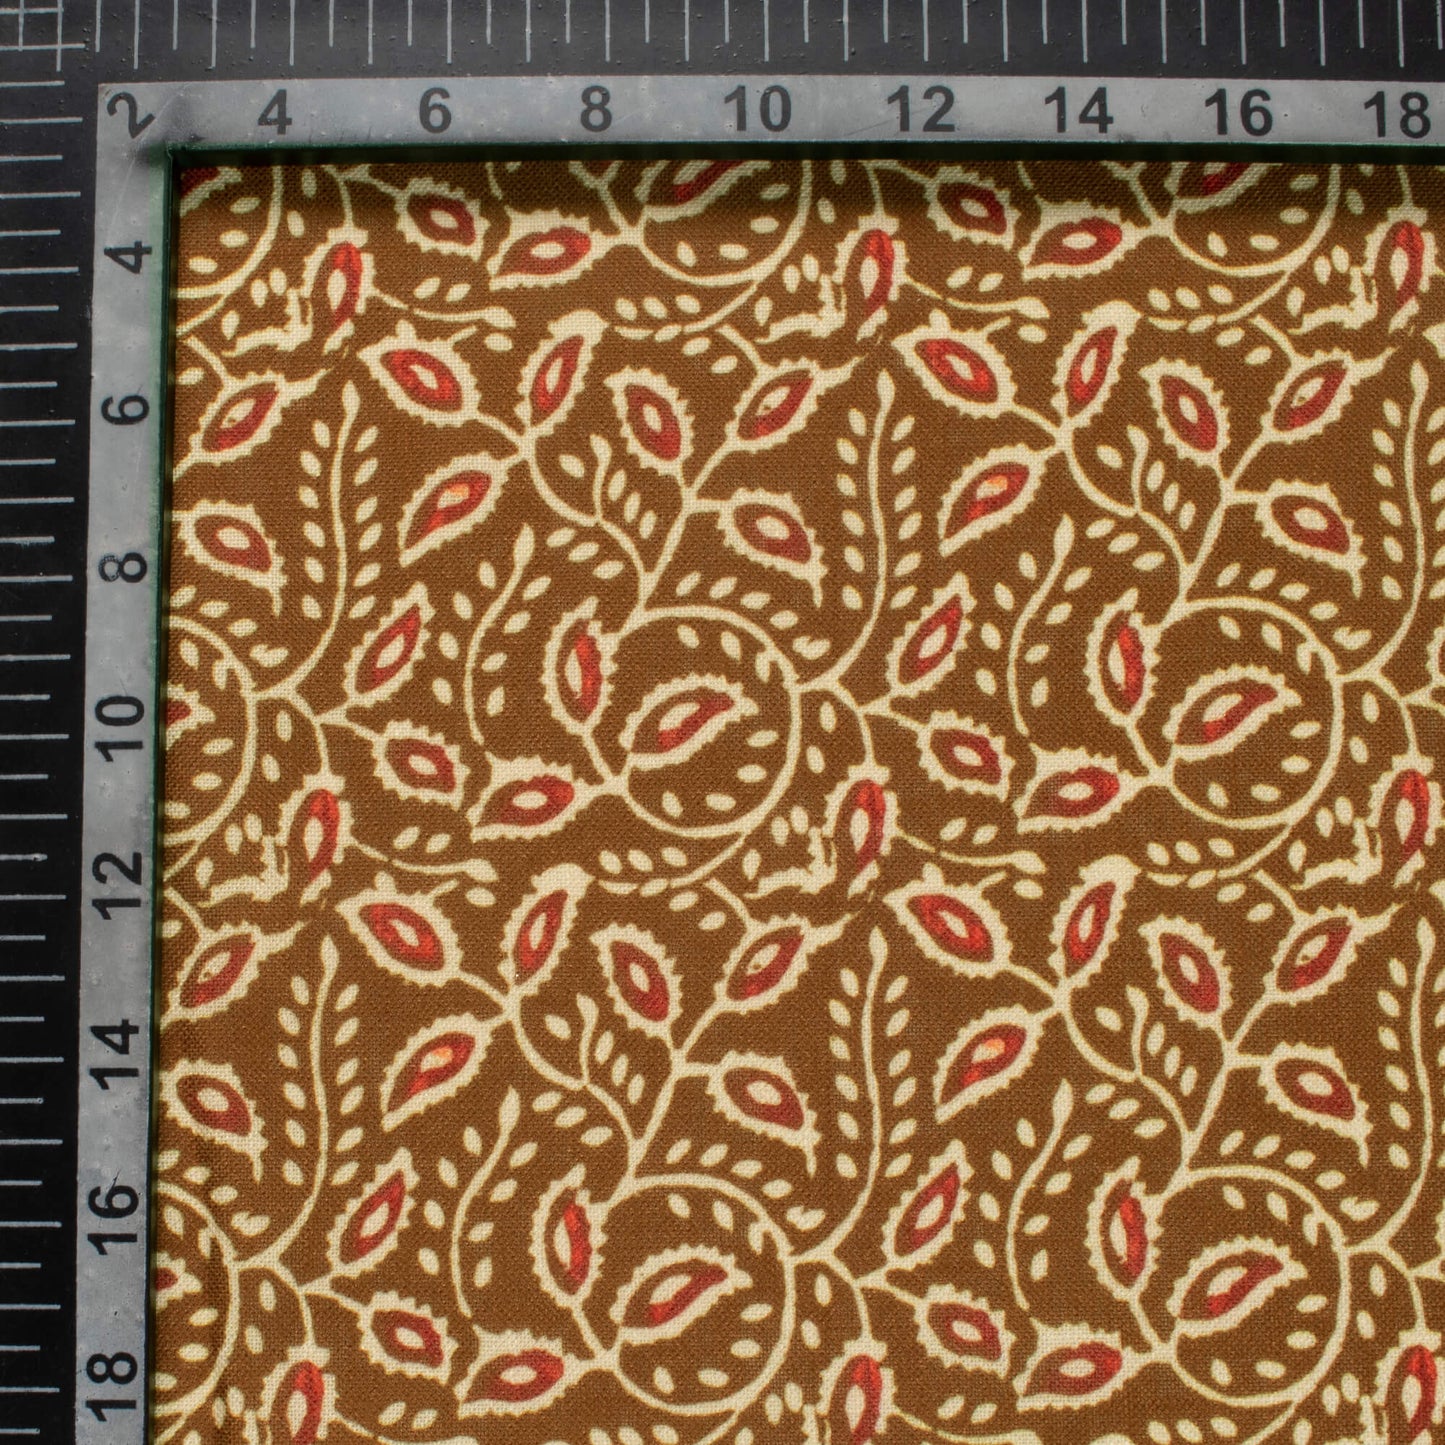 Dark Brown And Red Leaf Pattern Digital Print Linen Textured Fabric (Width 56 Inches)